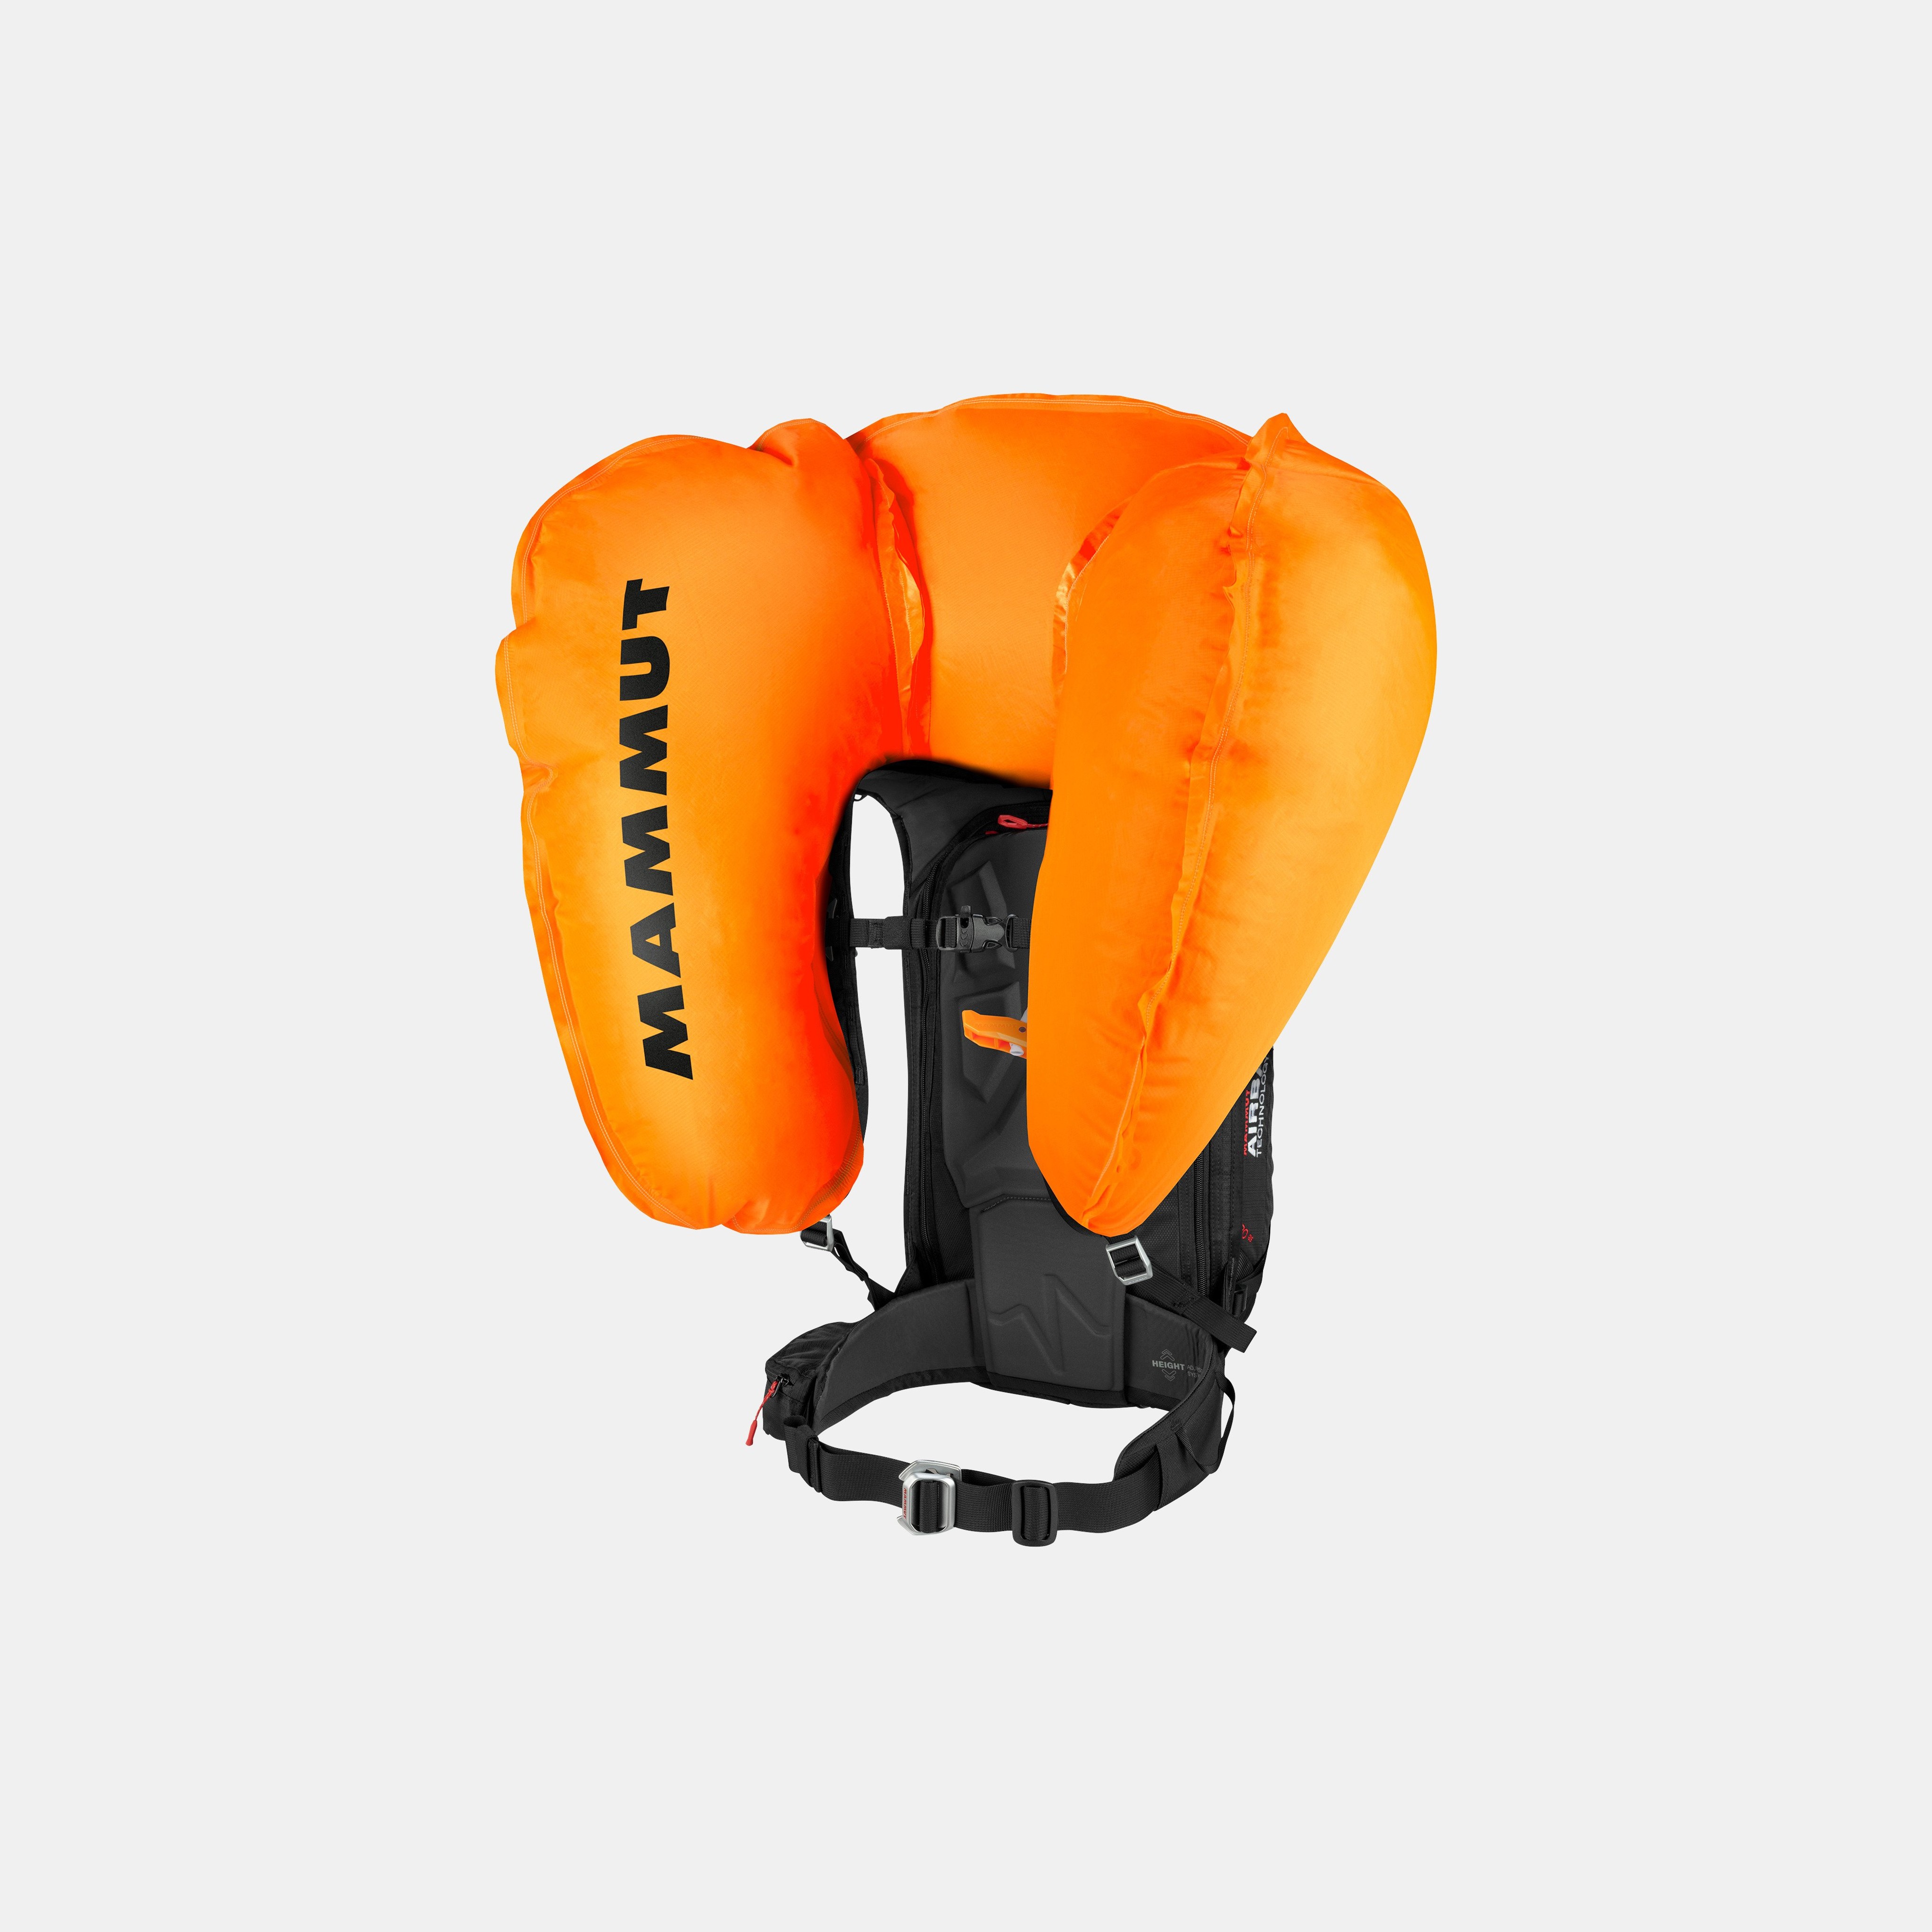 Pro Protection Airbag 3.0 product image